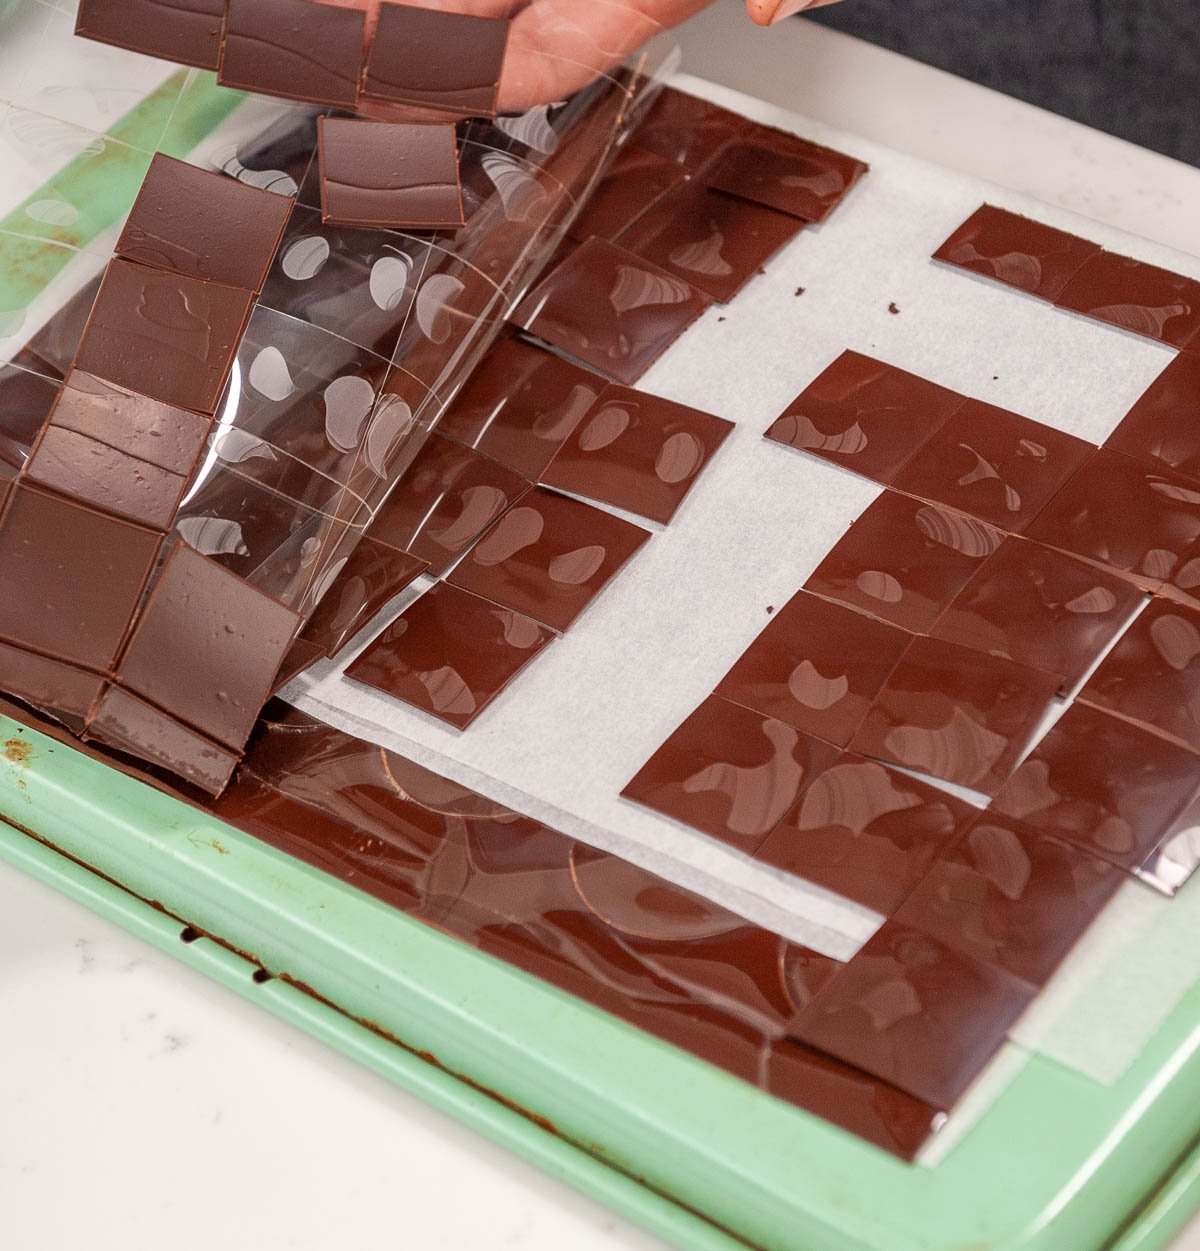 removing chocolate squares from acetate